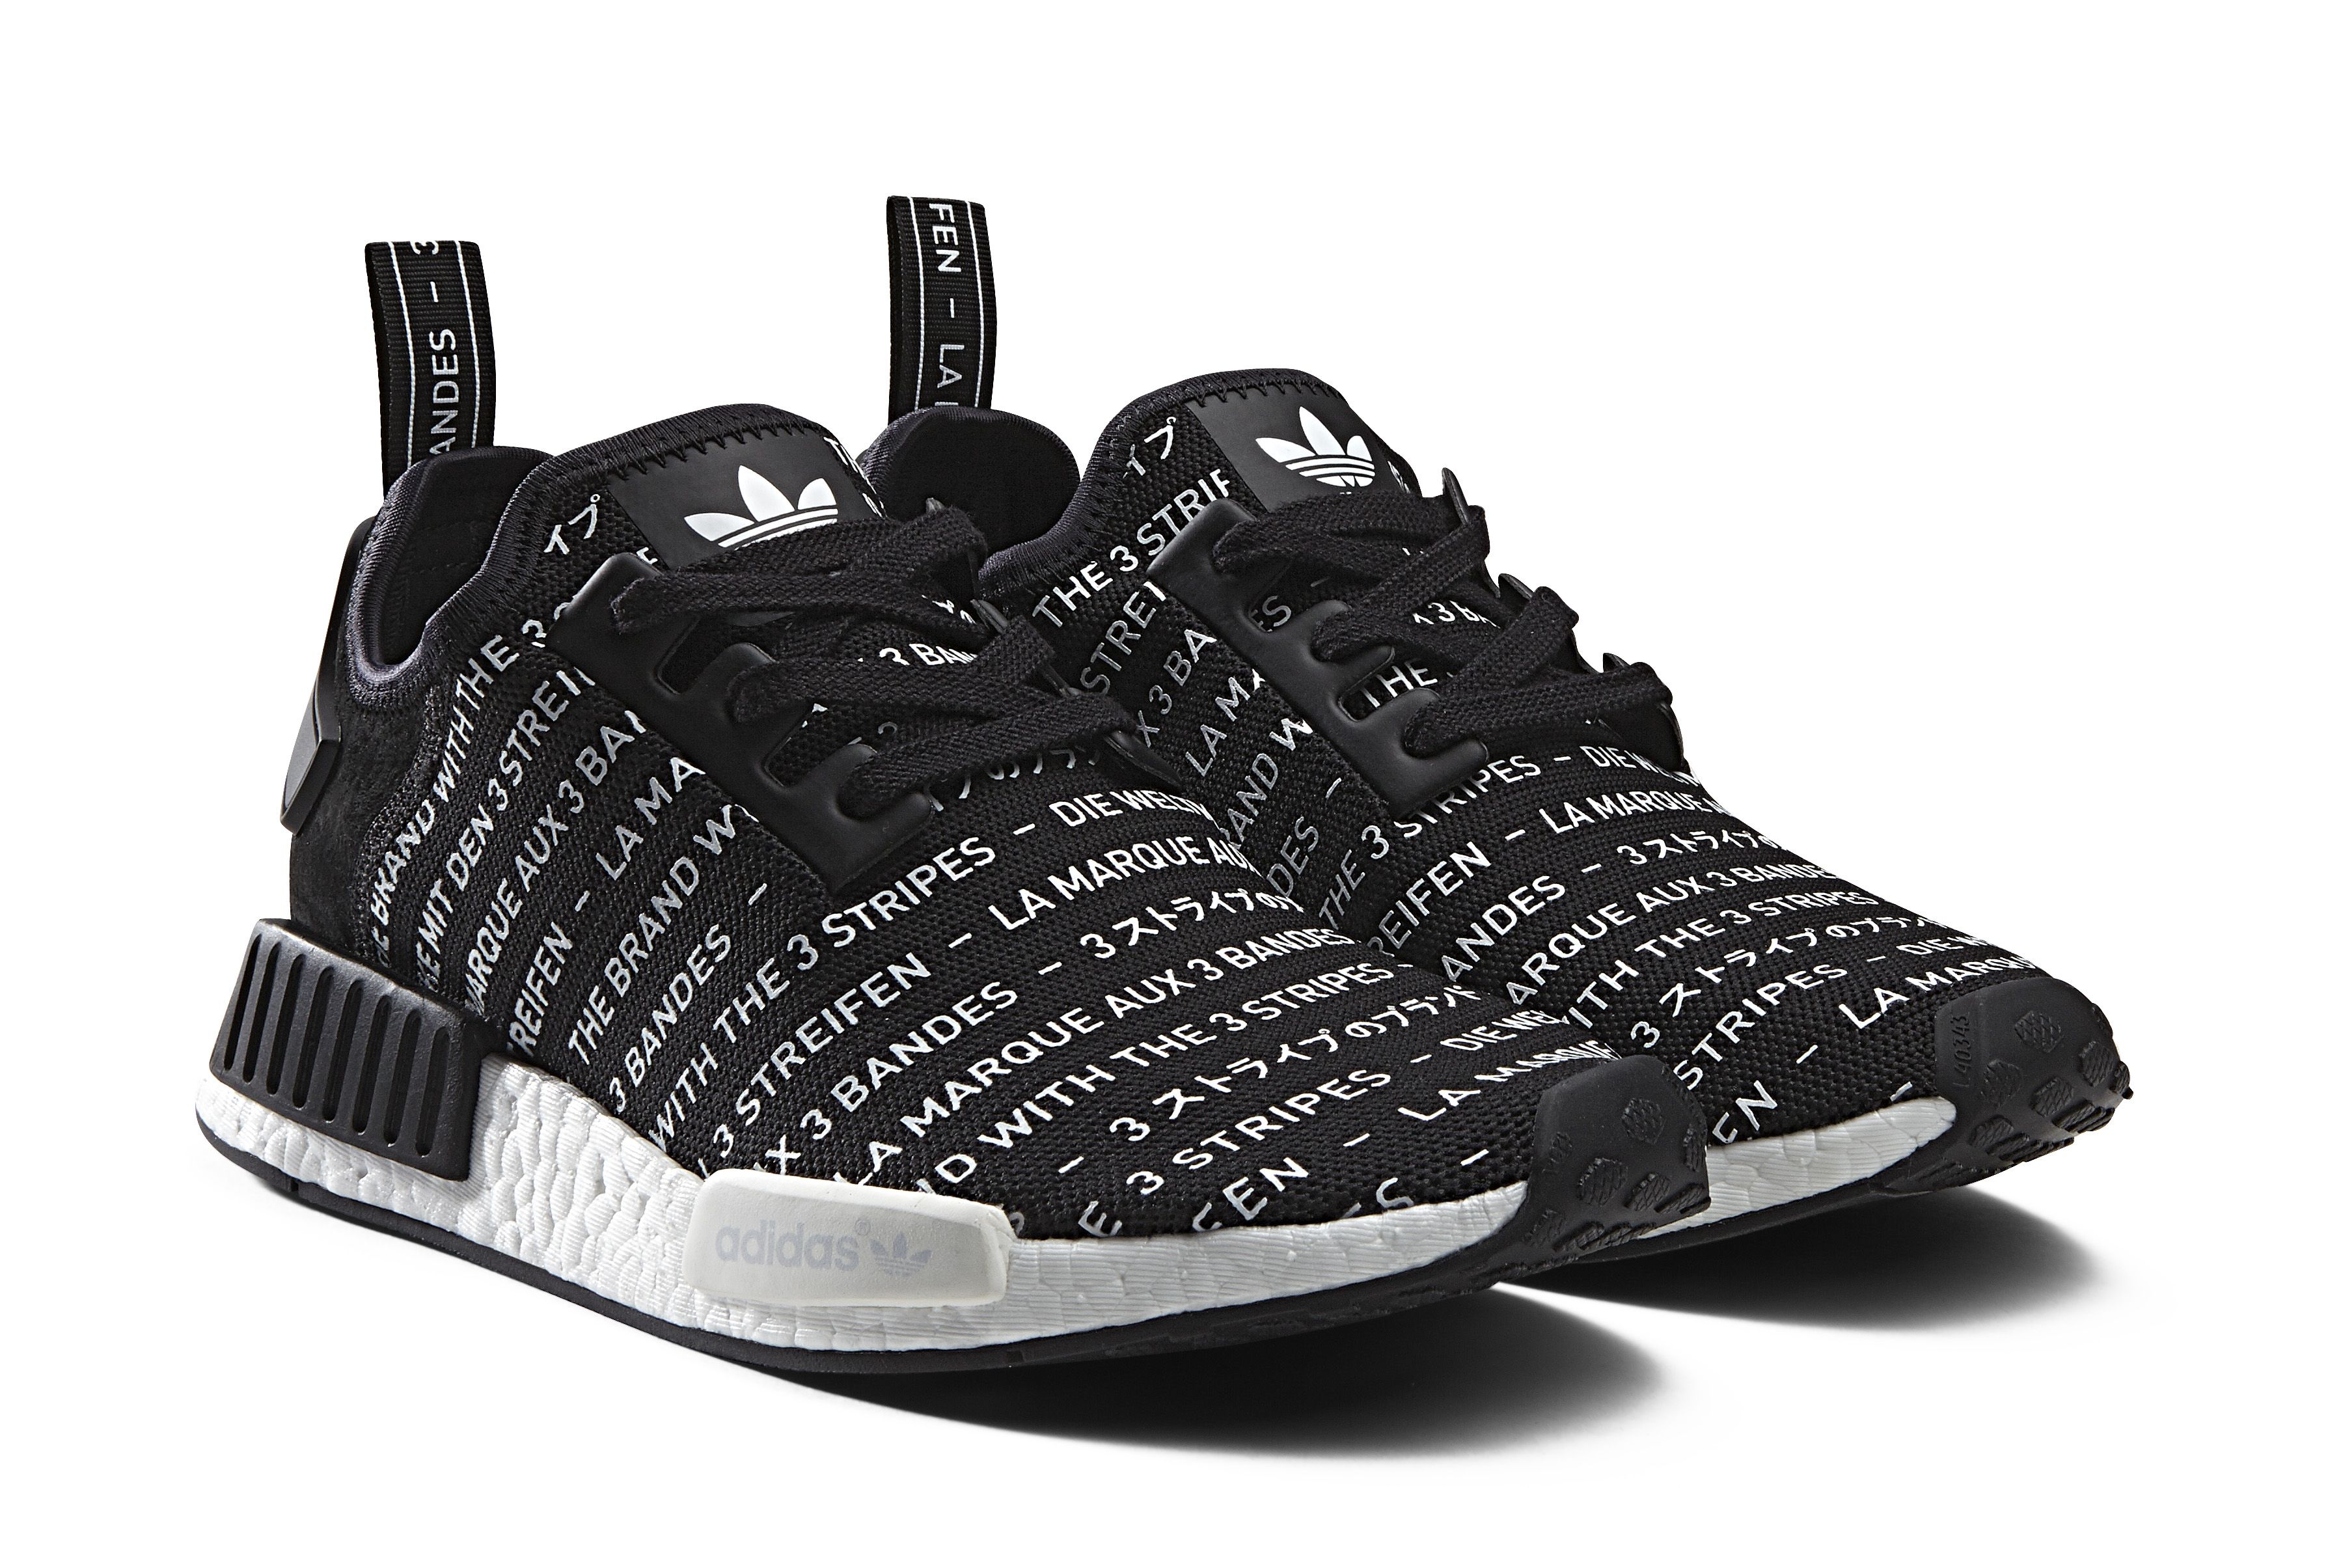 coolest nmd